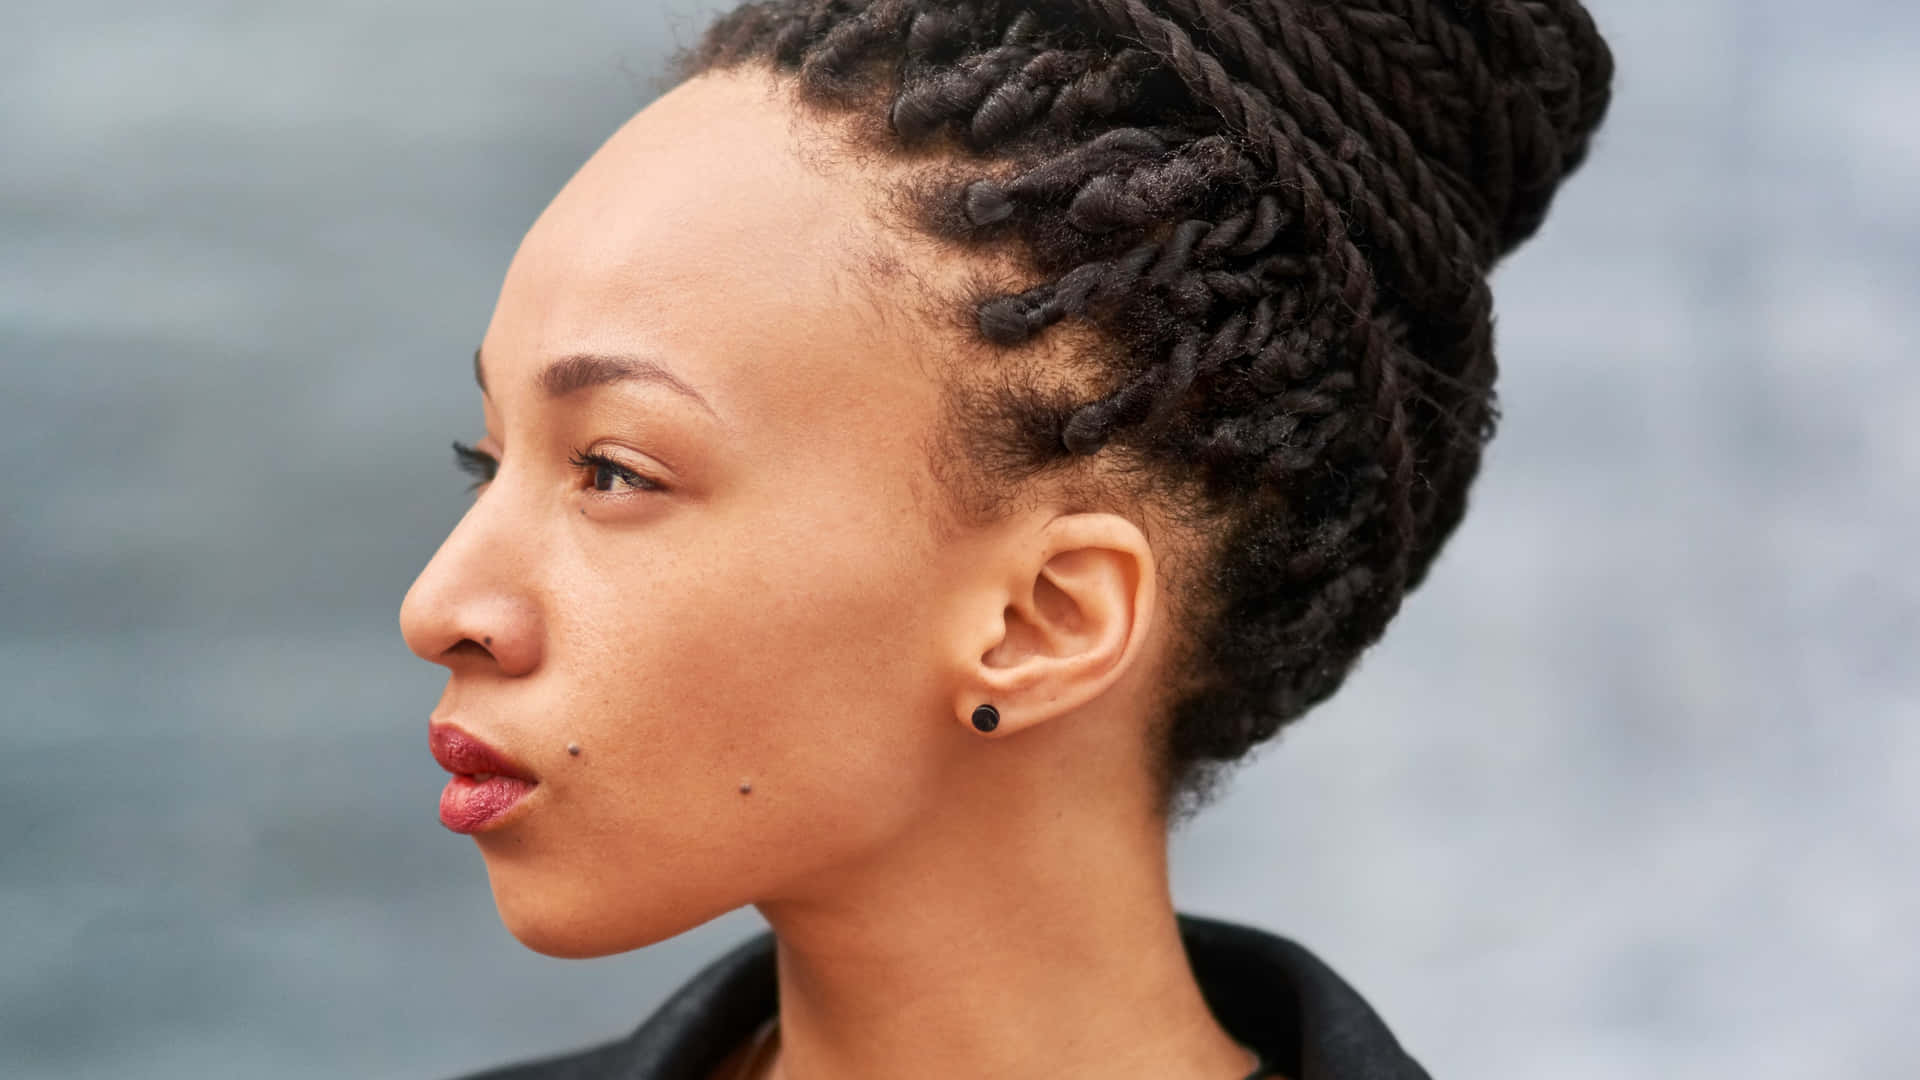 A Young Woman With A Braided Hairstyle